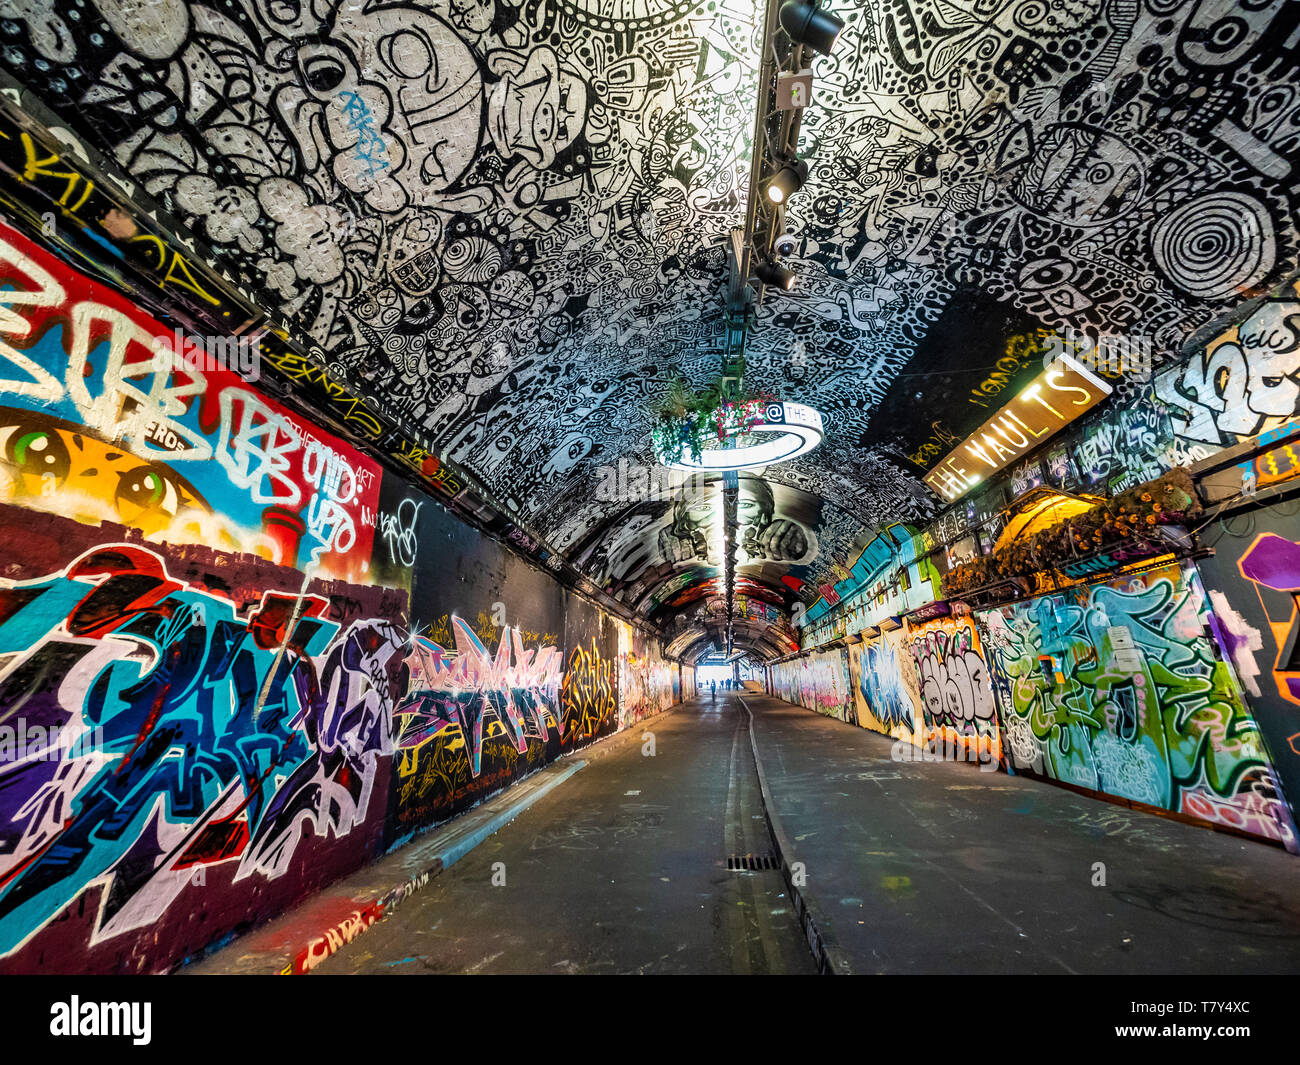 The Banksy Tunnel, ( Leake St Tunnel or Leake Street Arches ) legal Graffiti venue under Waterloo train station, London, UK. Stock Photo